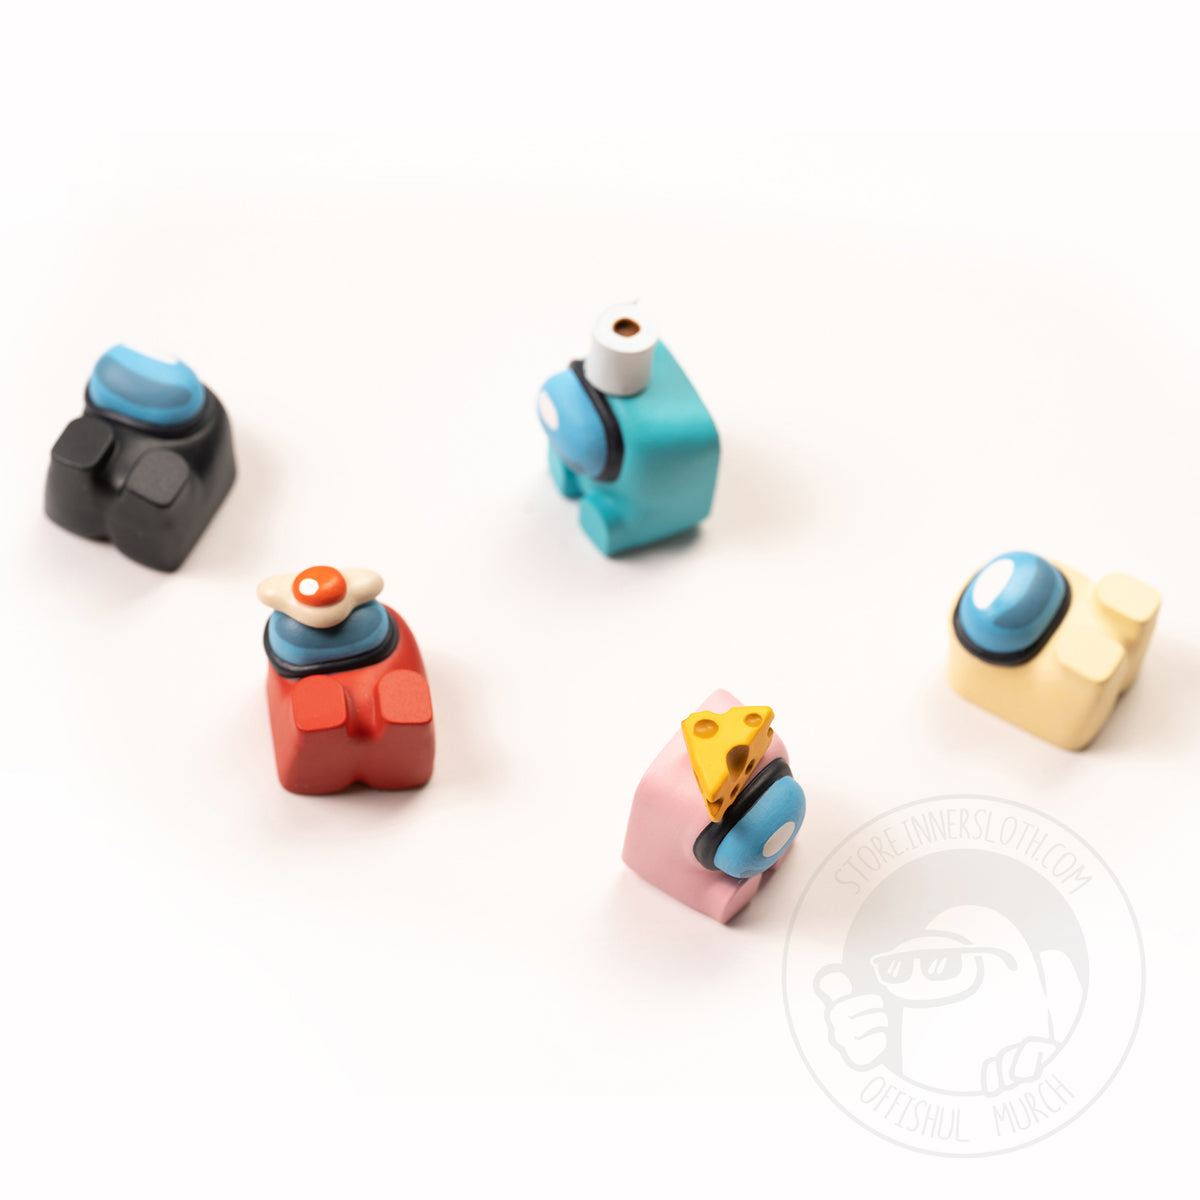 A product photo of five Crewmate keycaps, all in different positions as though they had been dropped together on the table. Colors shown are a black crewmate with no hat laying down, a red crewmate with an egg on its visor laying down, a cyan crewmate with a toilet paper hat sitting up, a pink crewmate sitting up with a cheese hat, and a banana crewmate laying down.